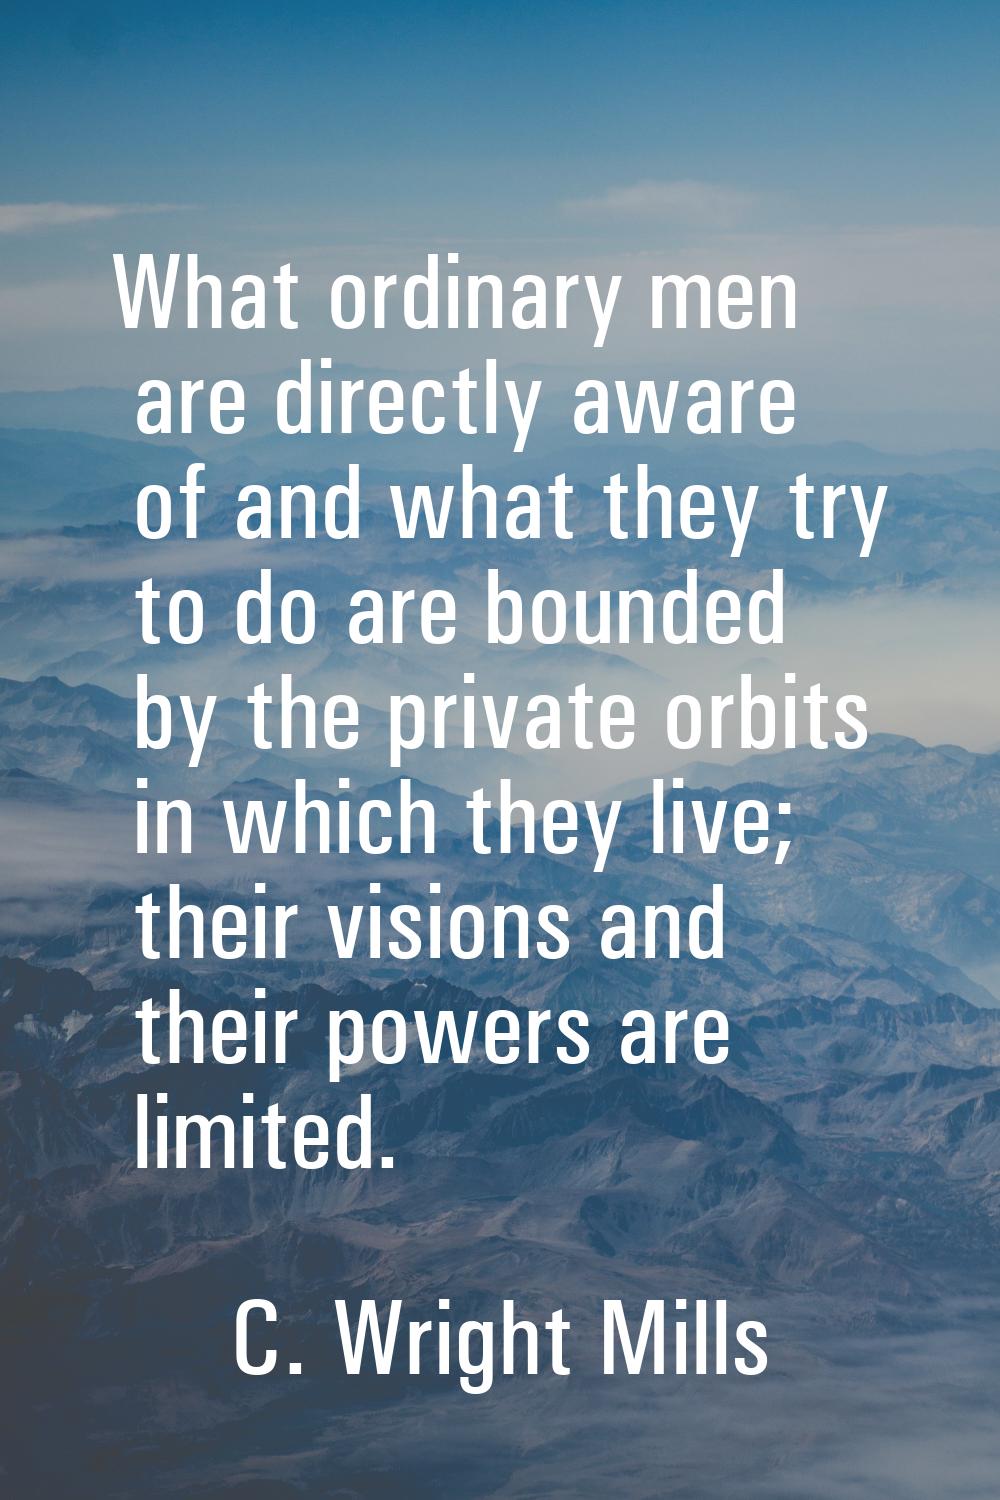 What ordinary men are directly aware of and what they try to do are bounded by the private orbits i